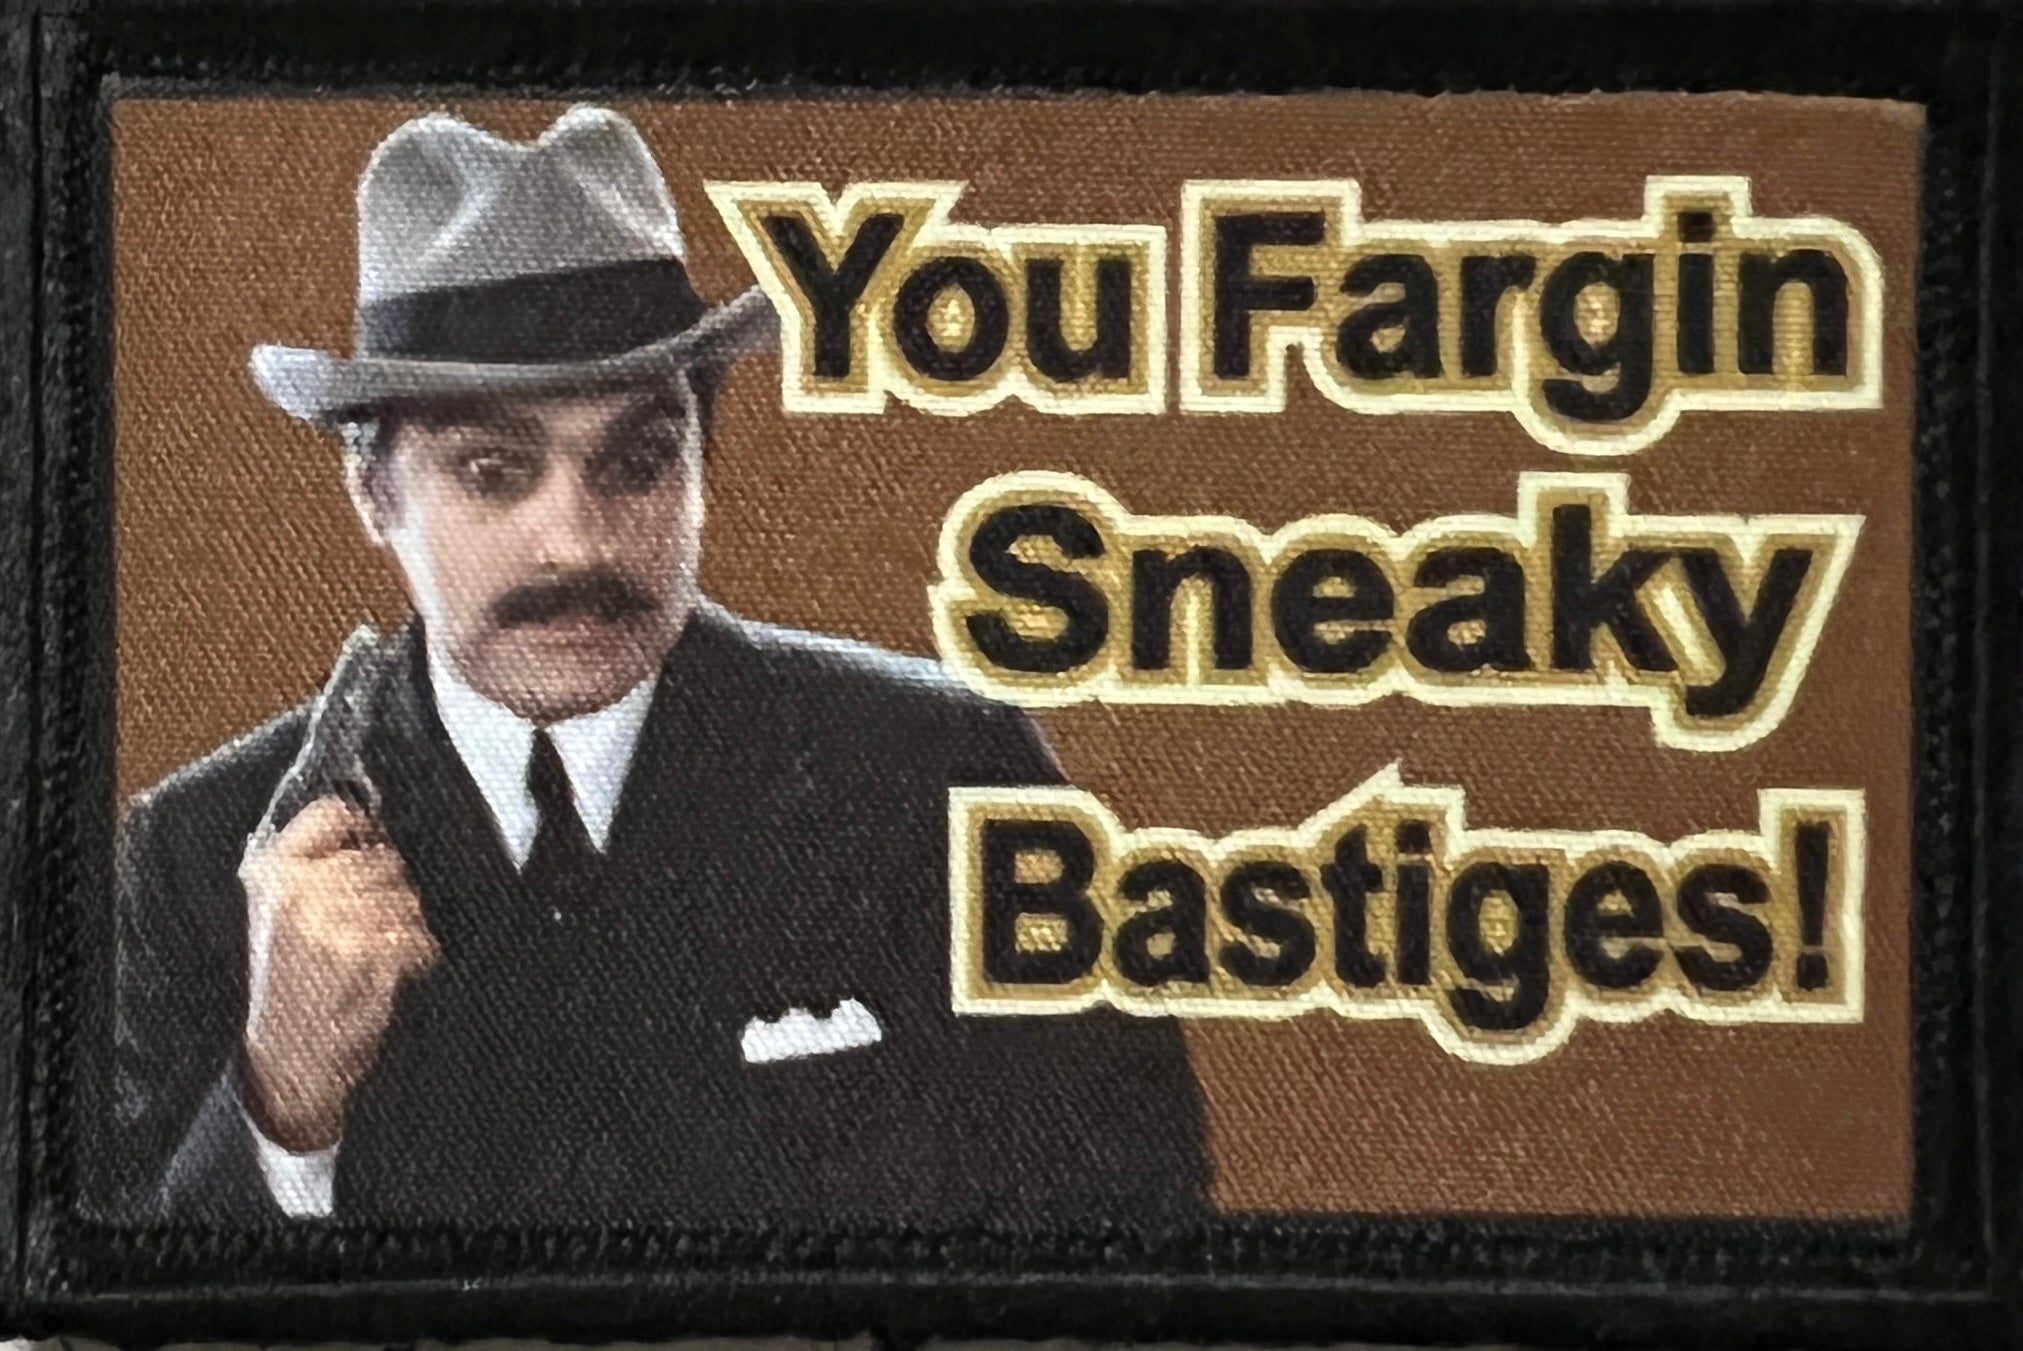 Johnny Dangerously Sneaky Bastiges! Morale Patch